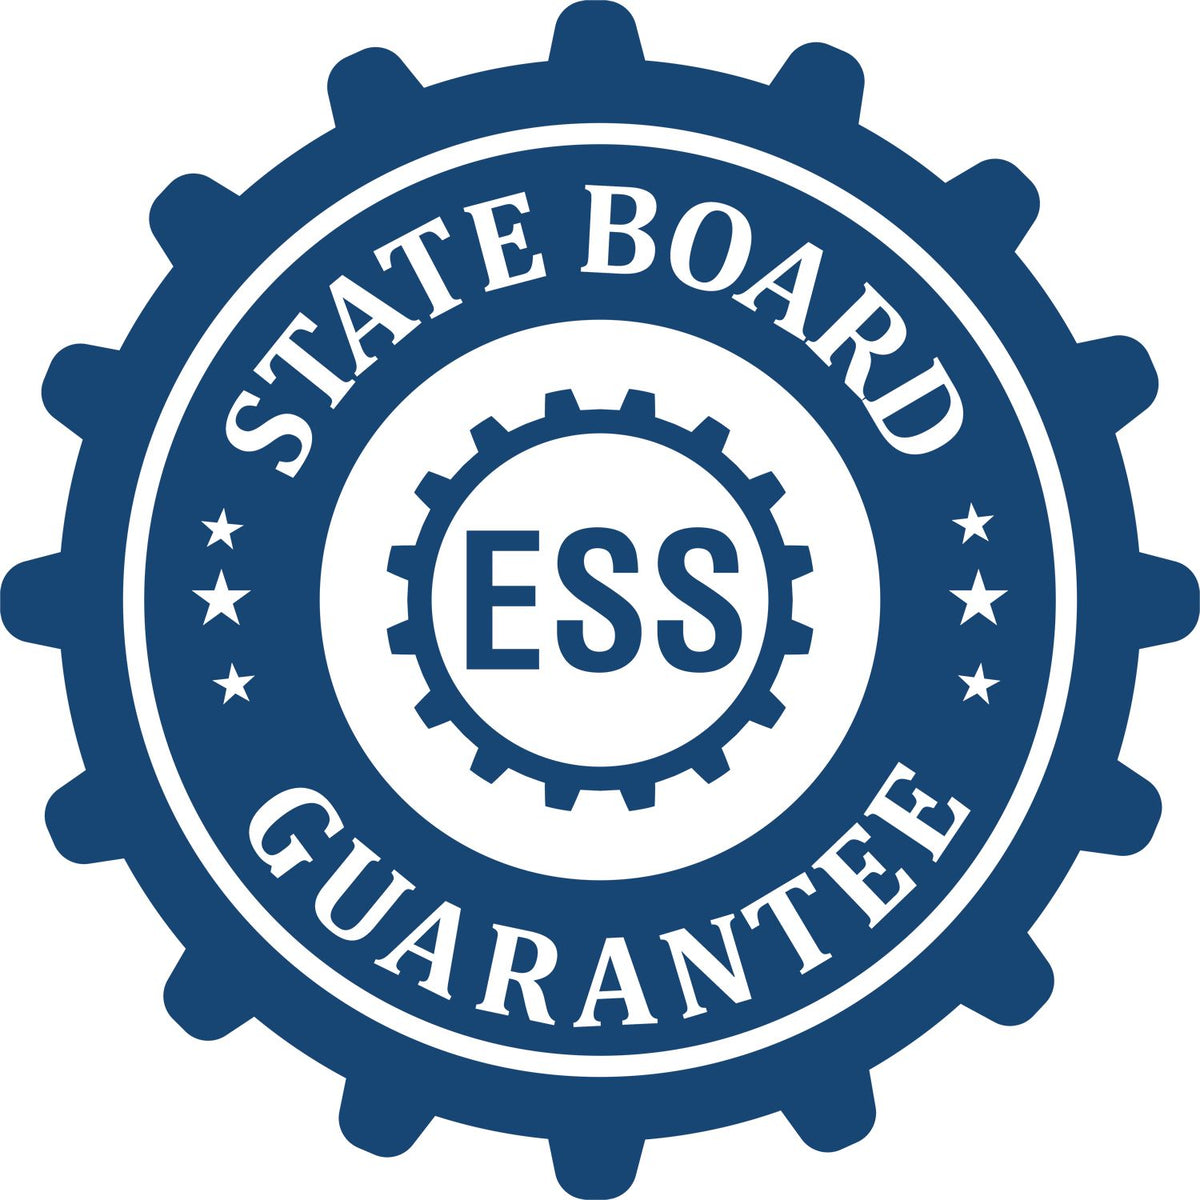 An emblem in a gear shape illustrating a state board guarantee for the Connecticut Engineer Desk Seal product.